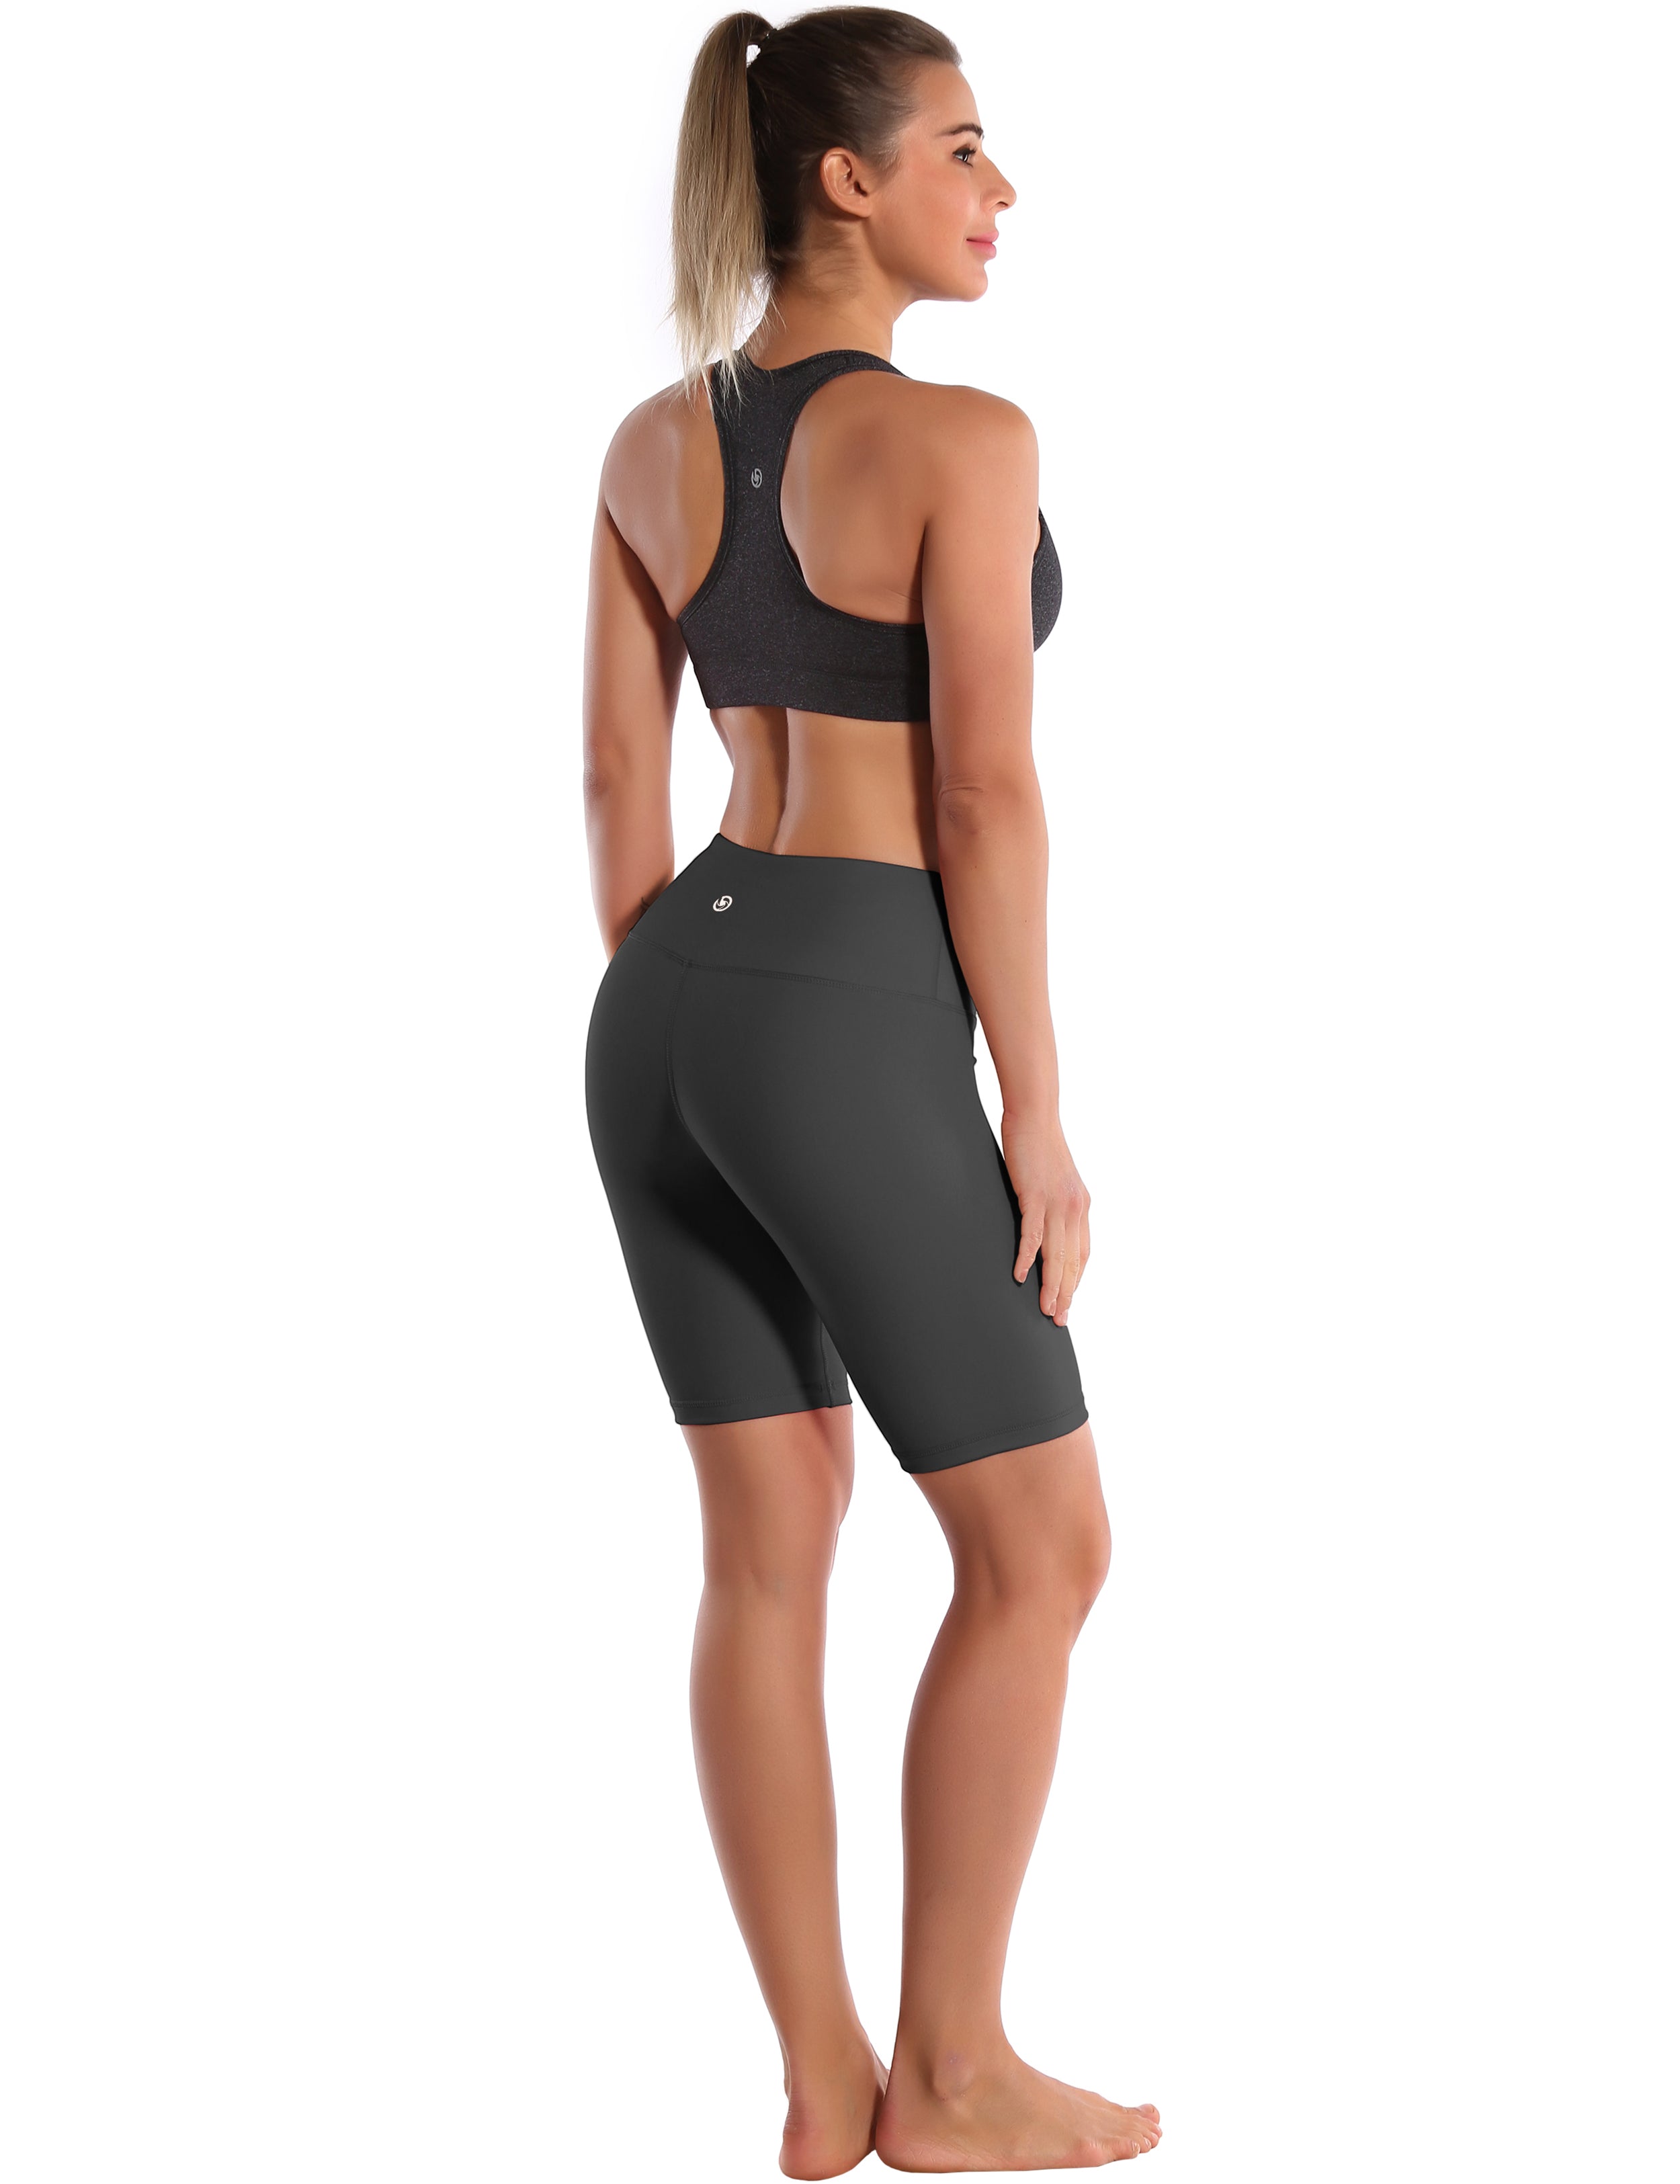 8" High Waist Yoga Shorts shadowcharcoal Sleek, soft, smooth and totally comfortable: our newest style is here. Softest-ever fabric High elasticity High density 4-way stretch Fabric doesn't attract lint easily No see-through Moisture-wicking Machine wash 75% Nylon, 25% Spandex